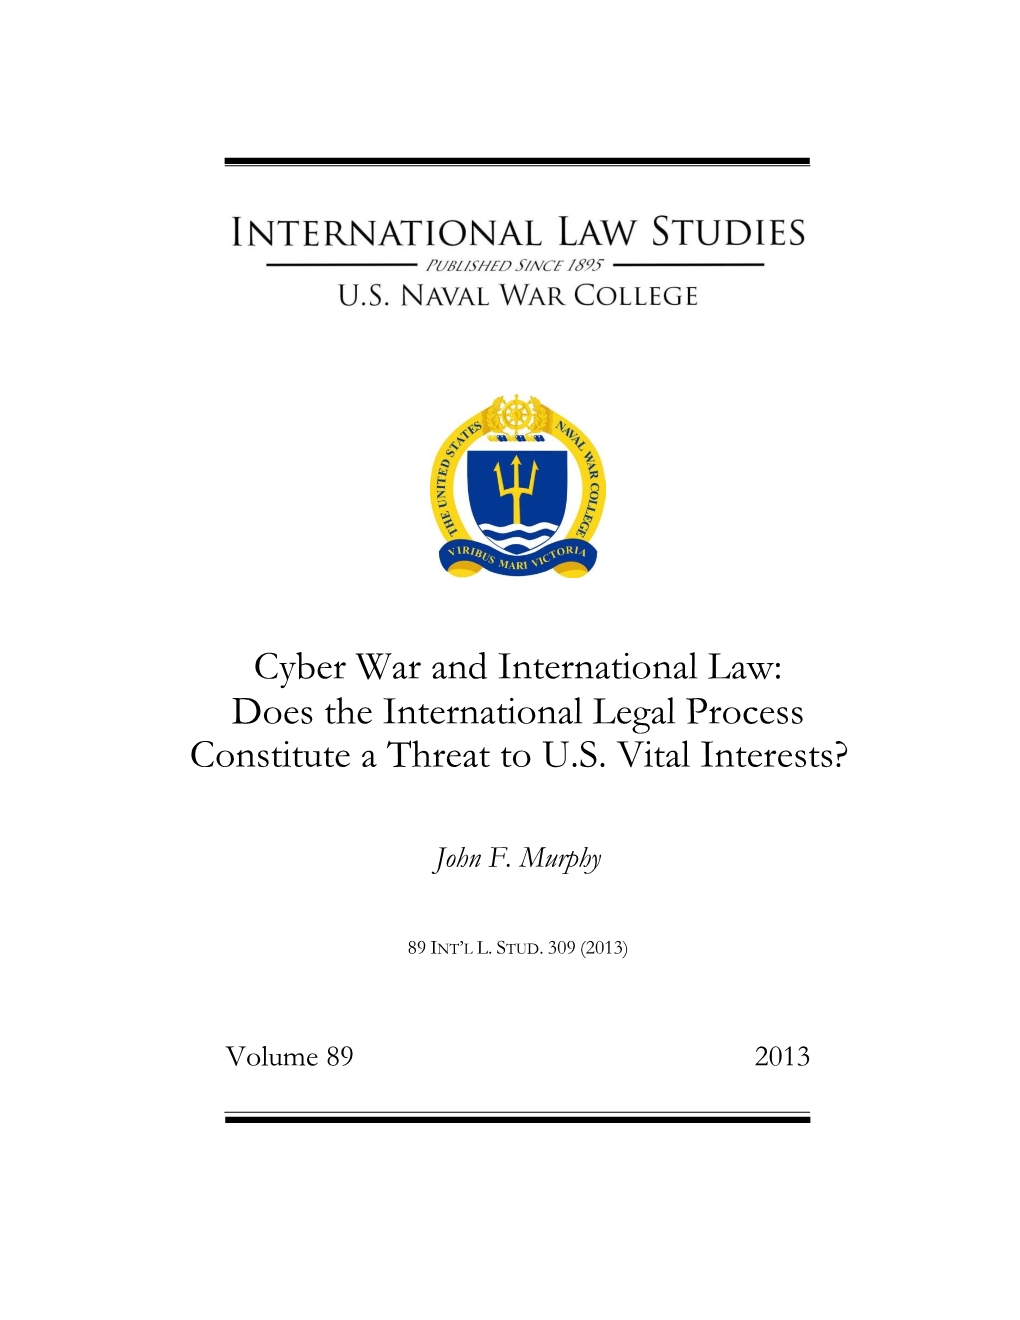 Cyber War and International Law: Does the International Legal Process Constitute a Threat to U.S